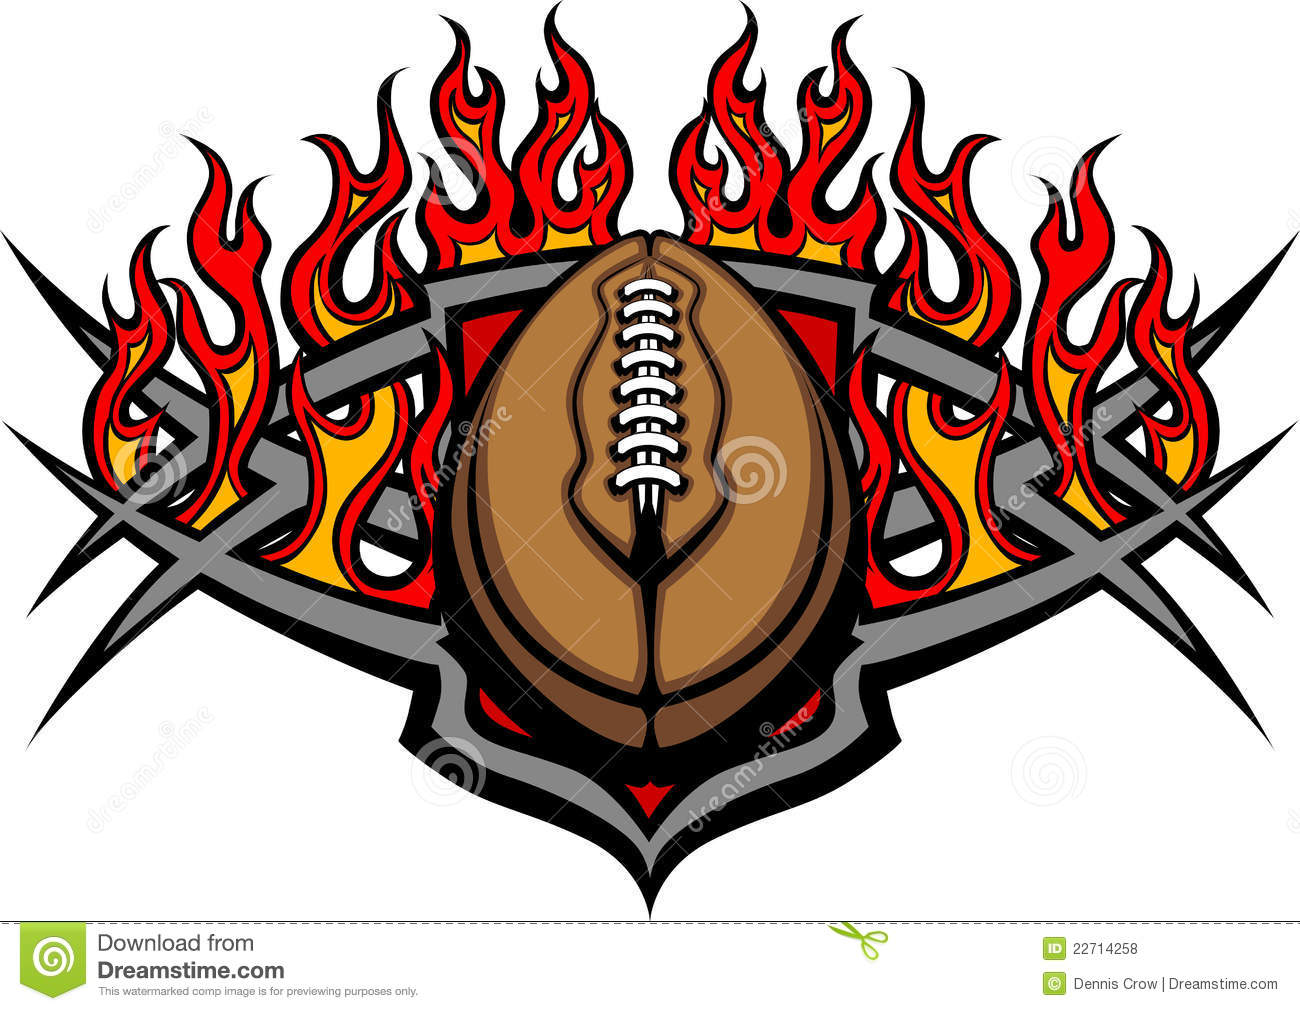 Football Ball Template With Flames Image Royalty Free Stock Photos.